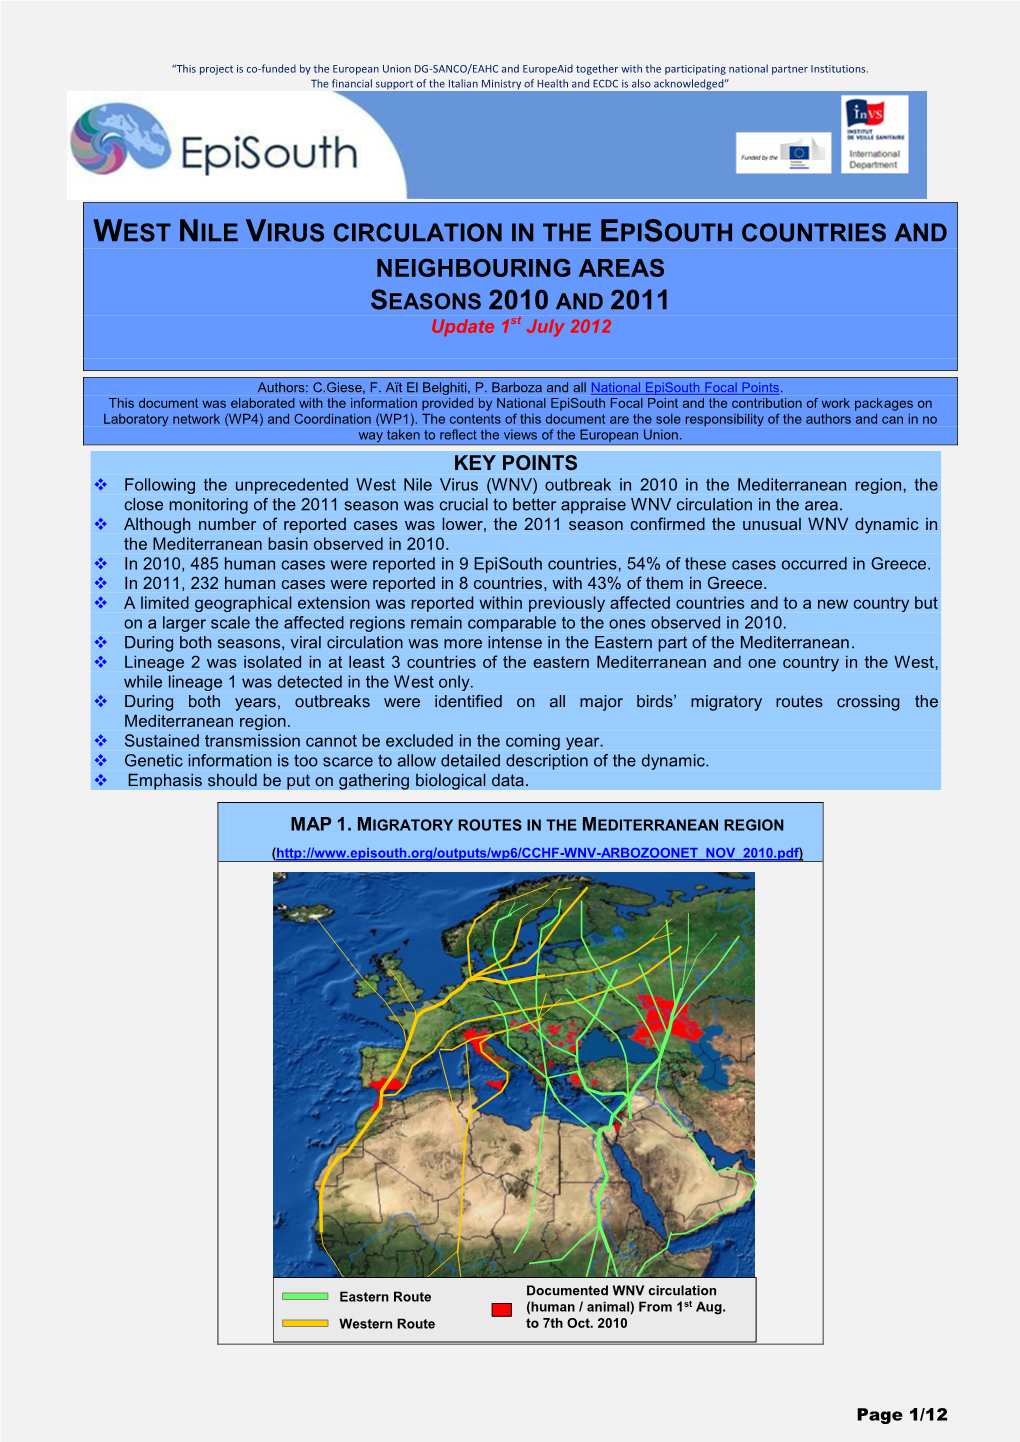 WEST NILE VIRUS CIRCULATION in the EPISOUTH COUNTRIES and NEIGHBOURING AREAS SEASONS 2010 and 2011 Update 1St July 2012